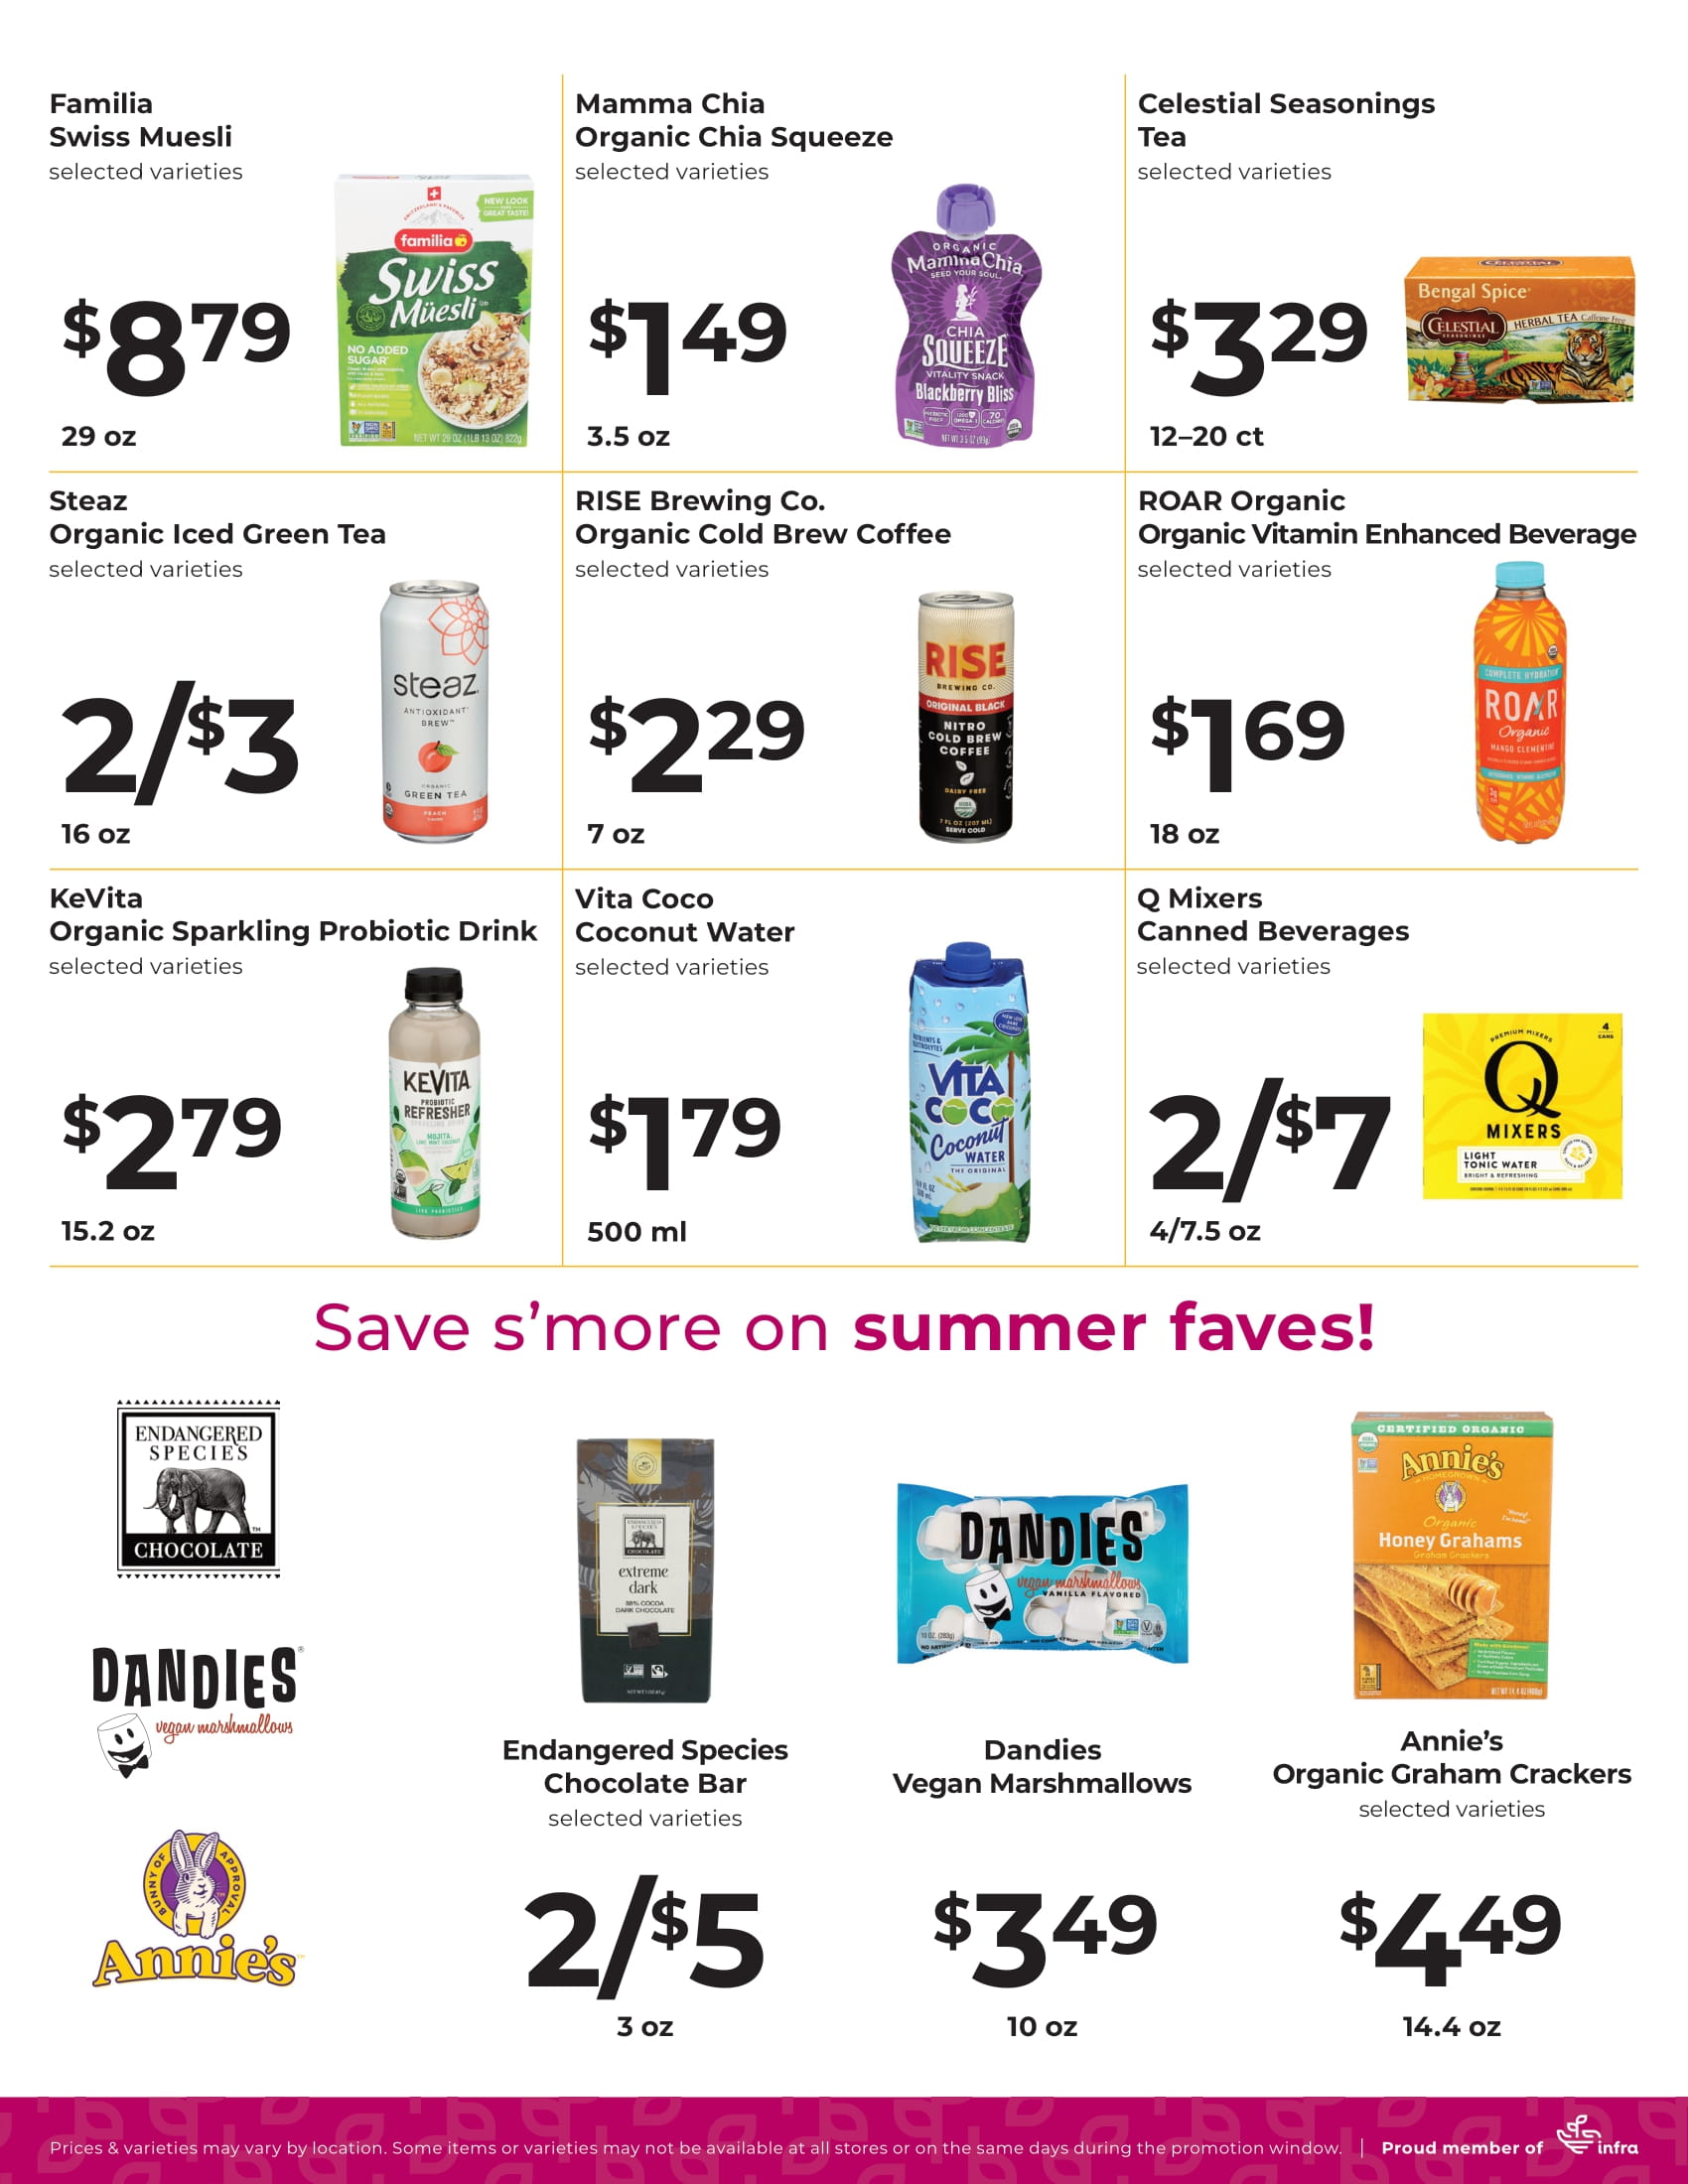 Ramona Family Naturals - monthly specials page 4